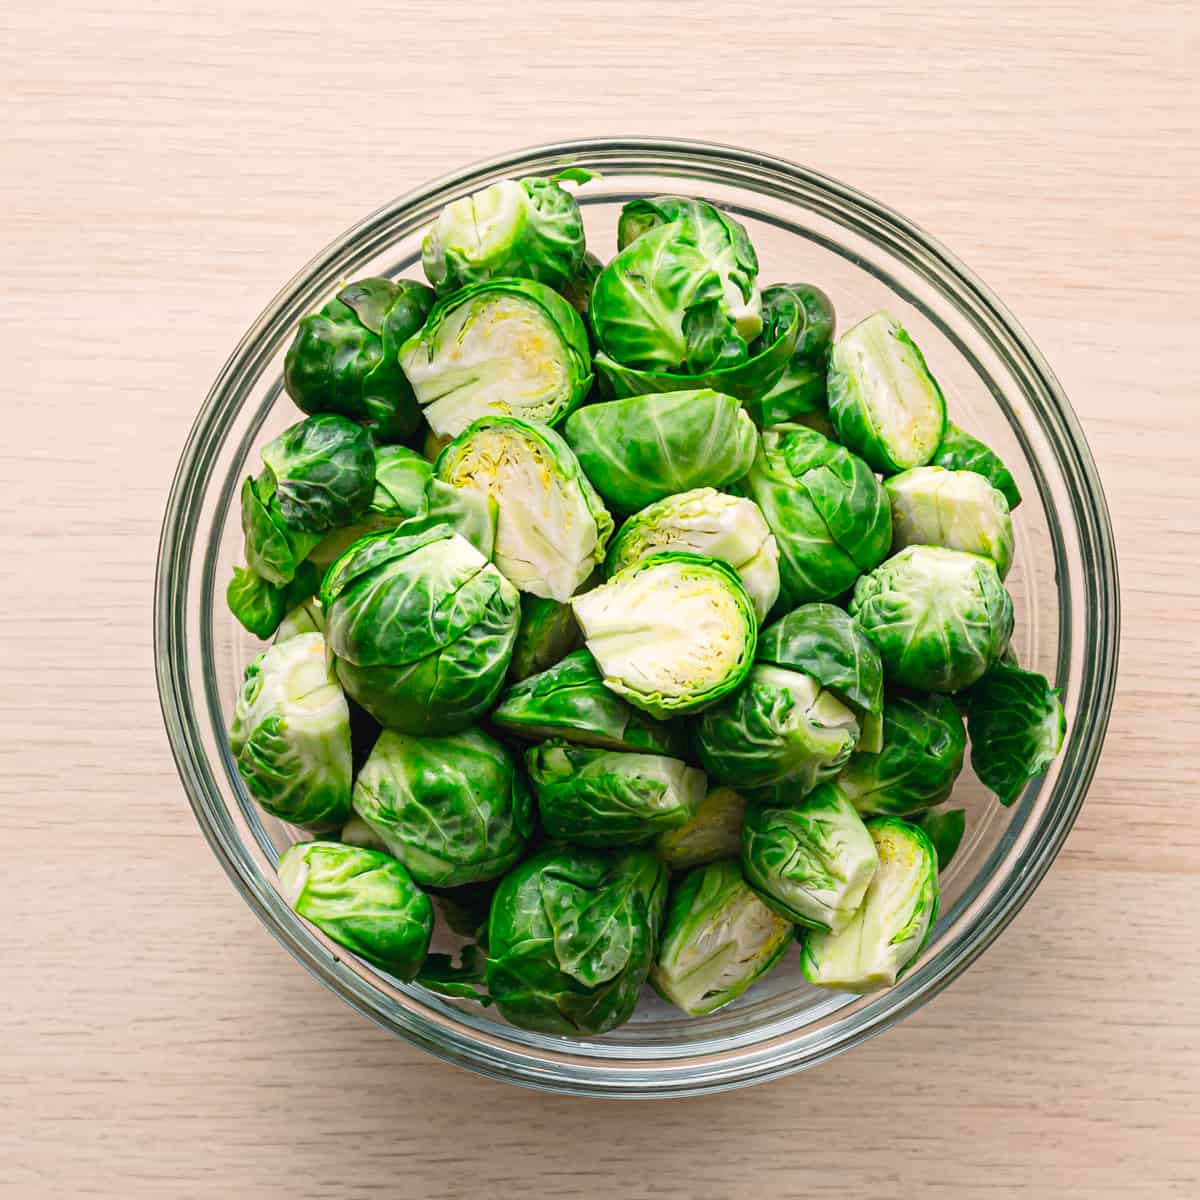 How to Blanch Brussels Sprouts